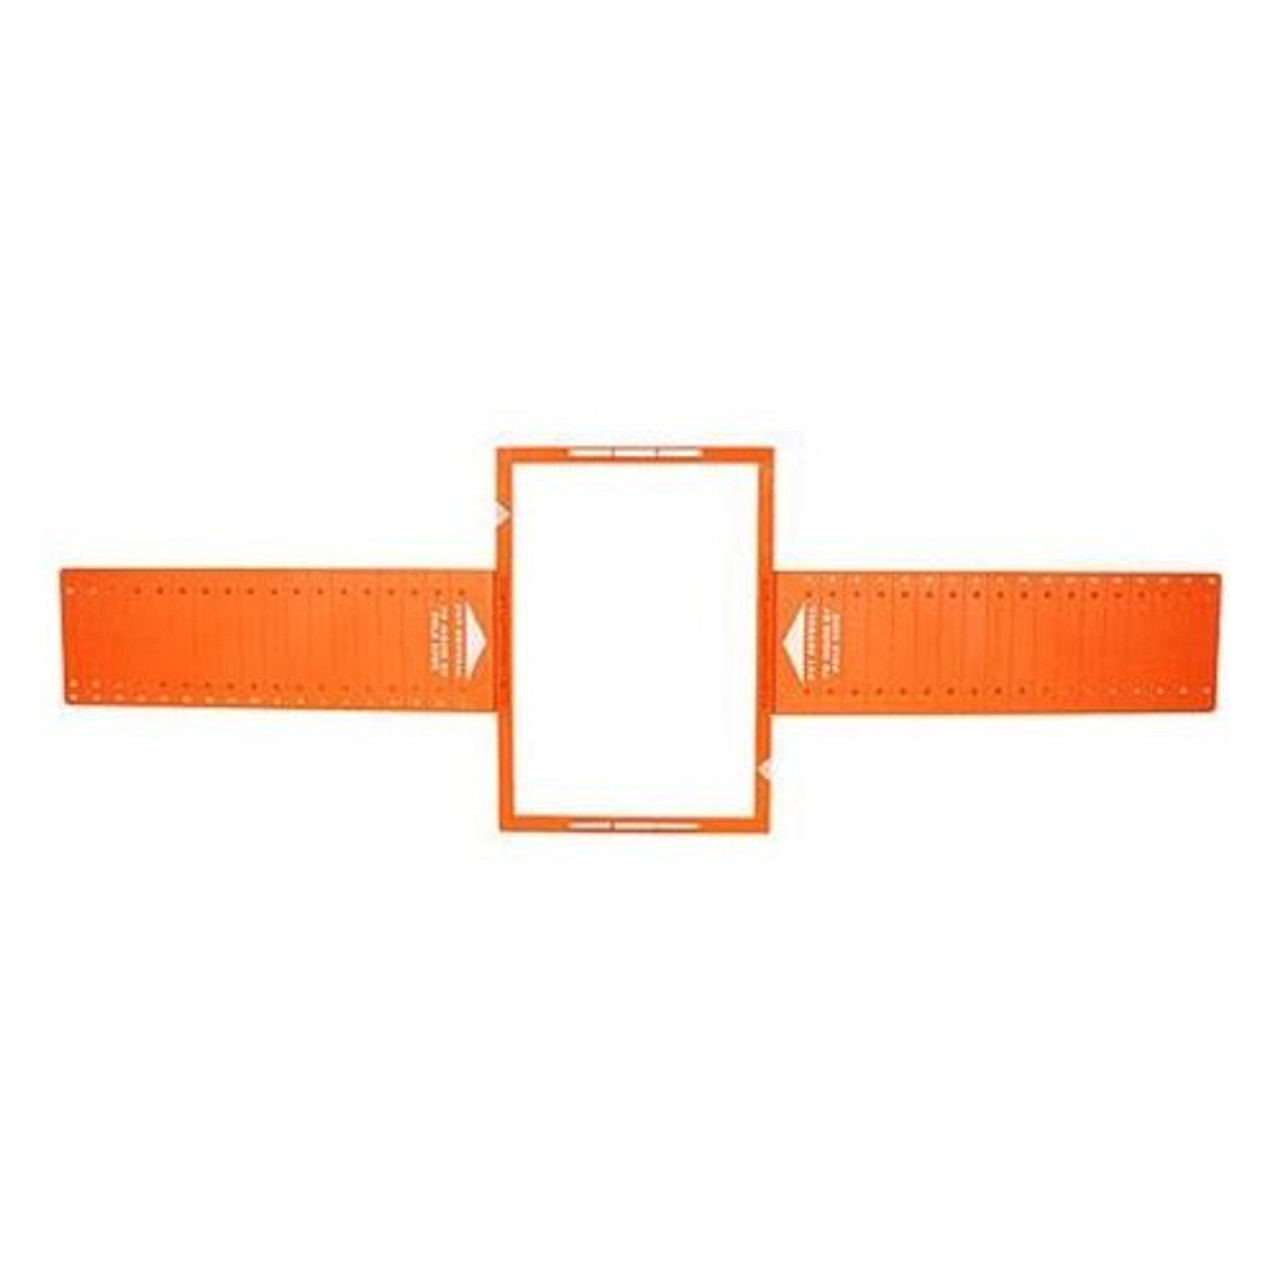 Sequence 730-561 6 1/2" In-Wall Speaker Rough in Kit Rectangular One Pair for New Construction By Steren